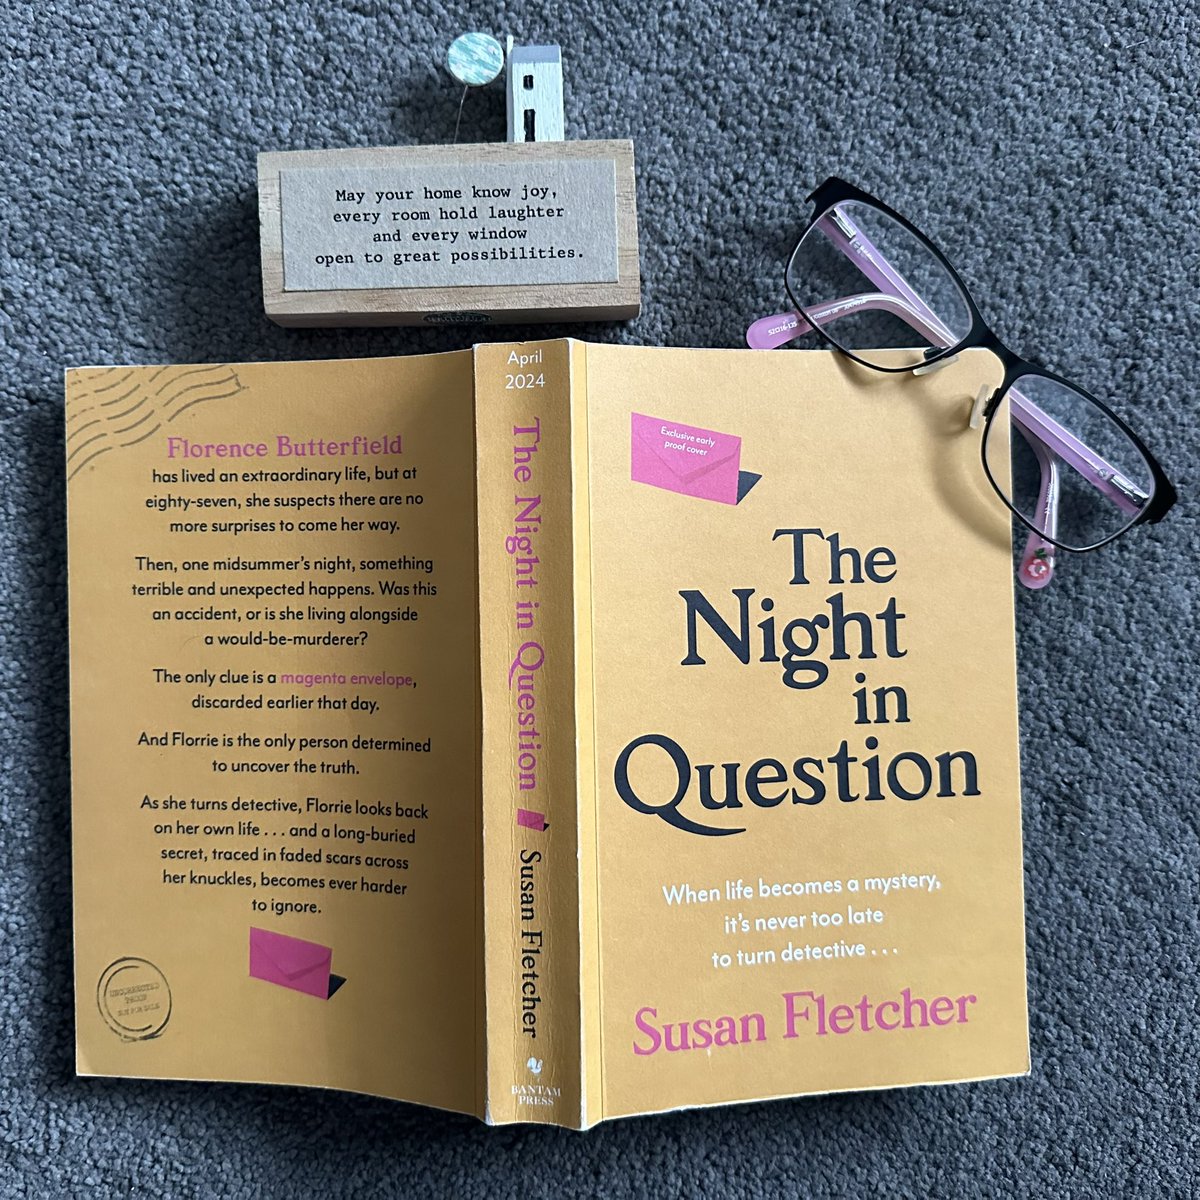 📚#BookReview📚

4⭐️Open the pages of @sfletcherauthor’s #TheNightInQuestion & meet Florrie Butterfield, the 87 year old with a zest for life who turns detective overnight after a tragic accident, but was it really murder?🤔

Full Review 🔗 shorturl.at/hPWY3

#BookTwitter